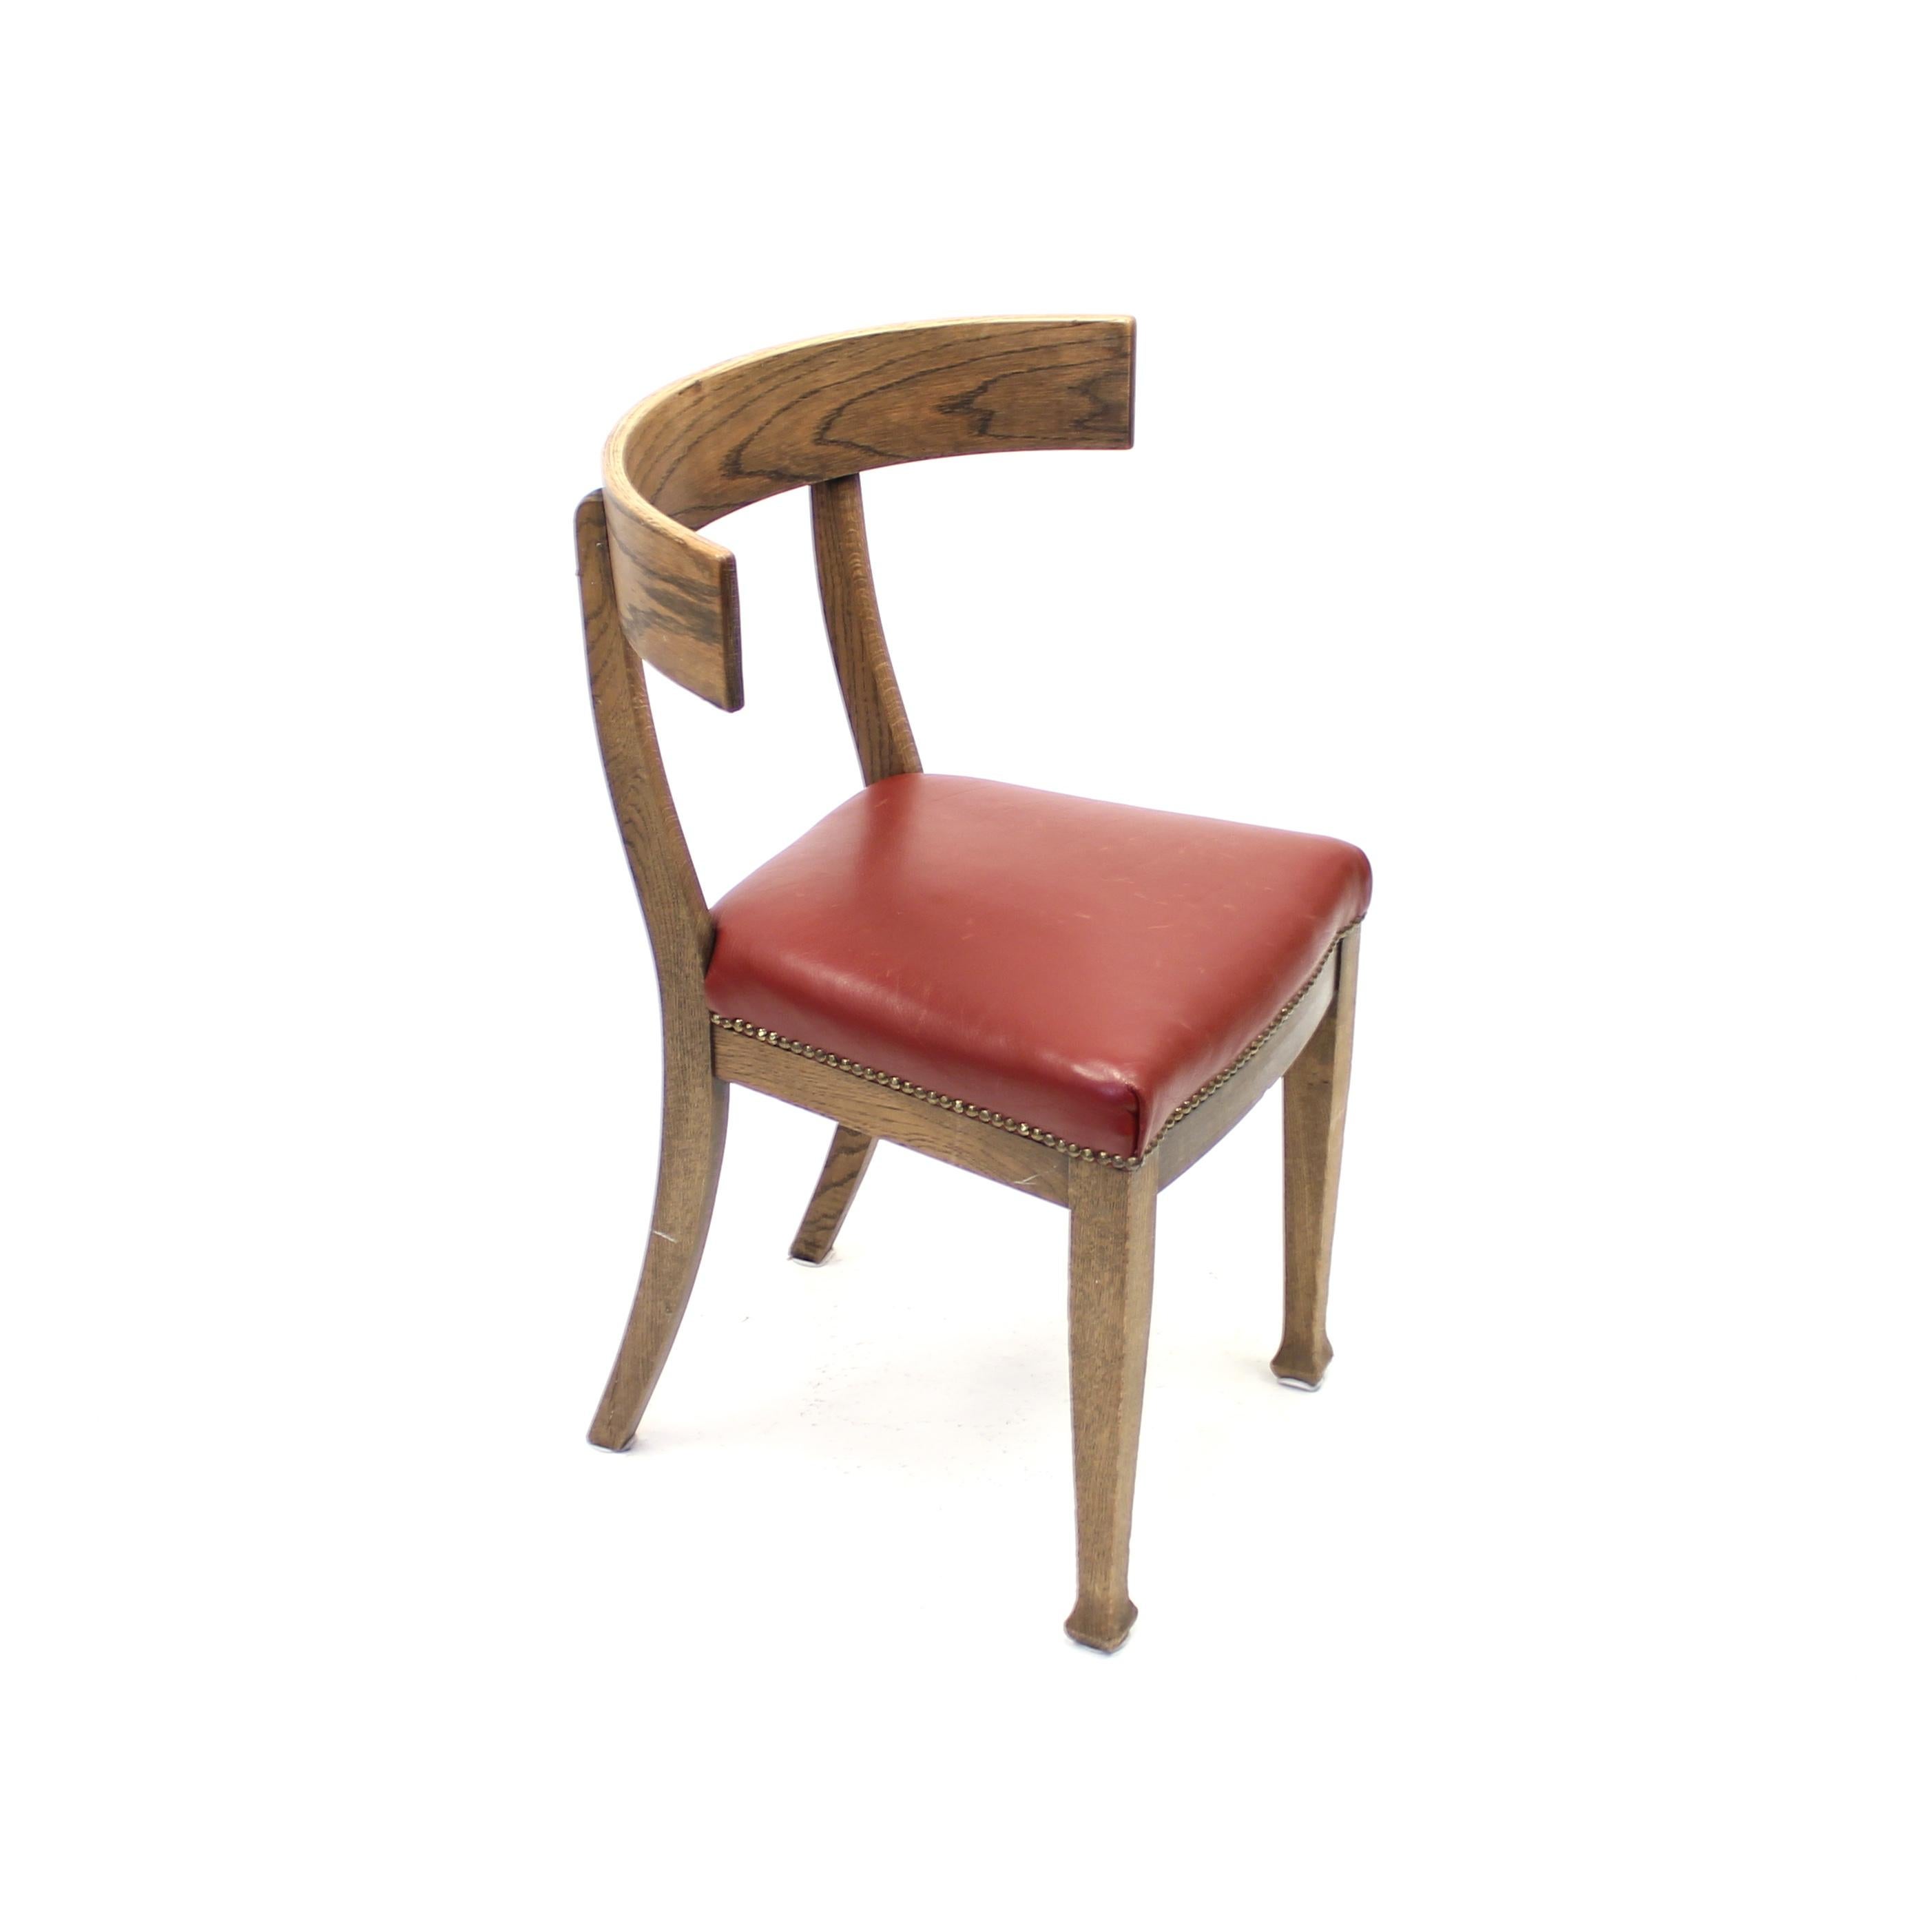 Rustic Oak and Leather Klismos Chair, Early 20th Century